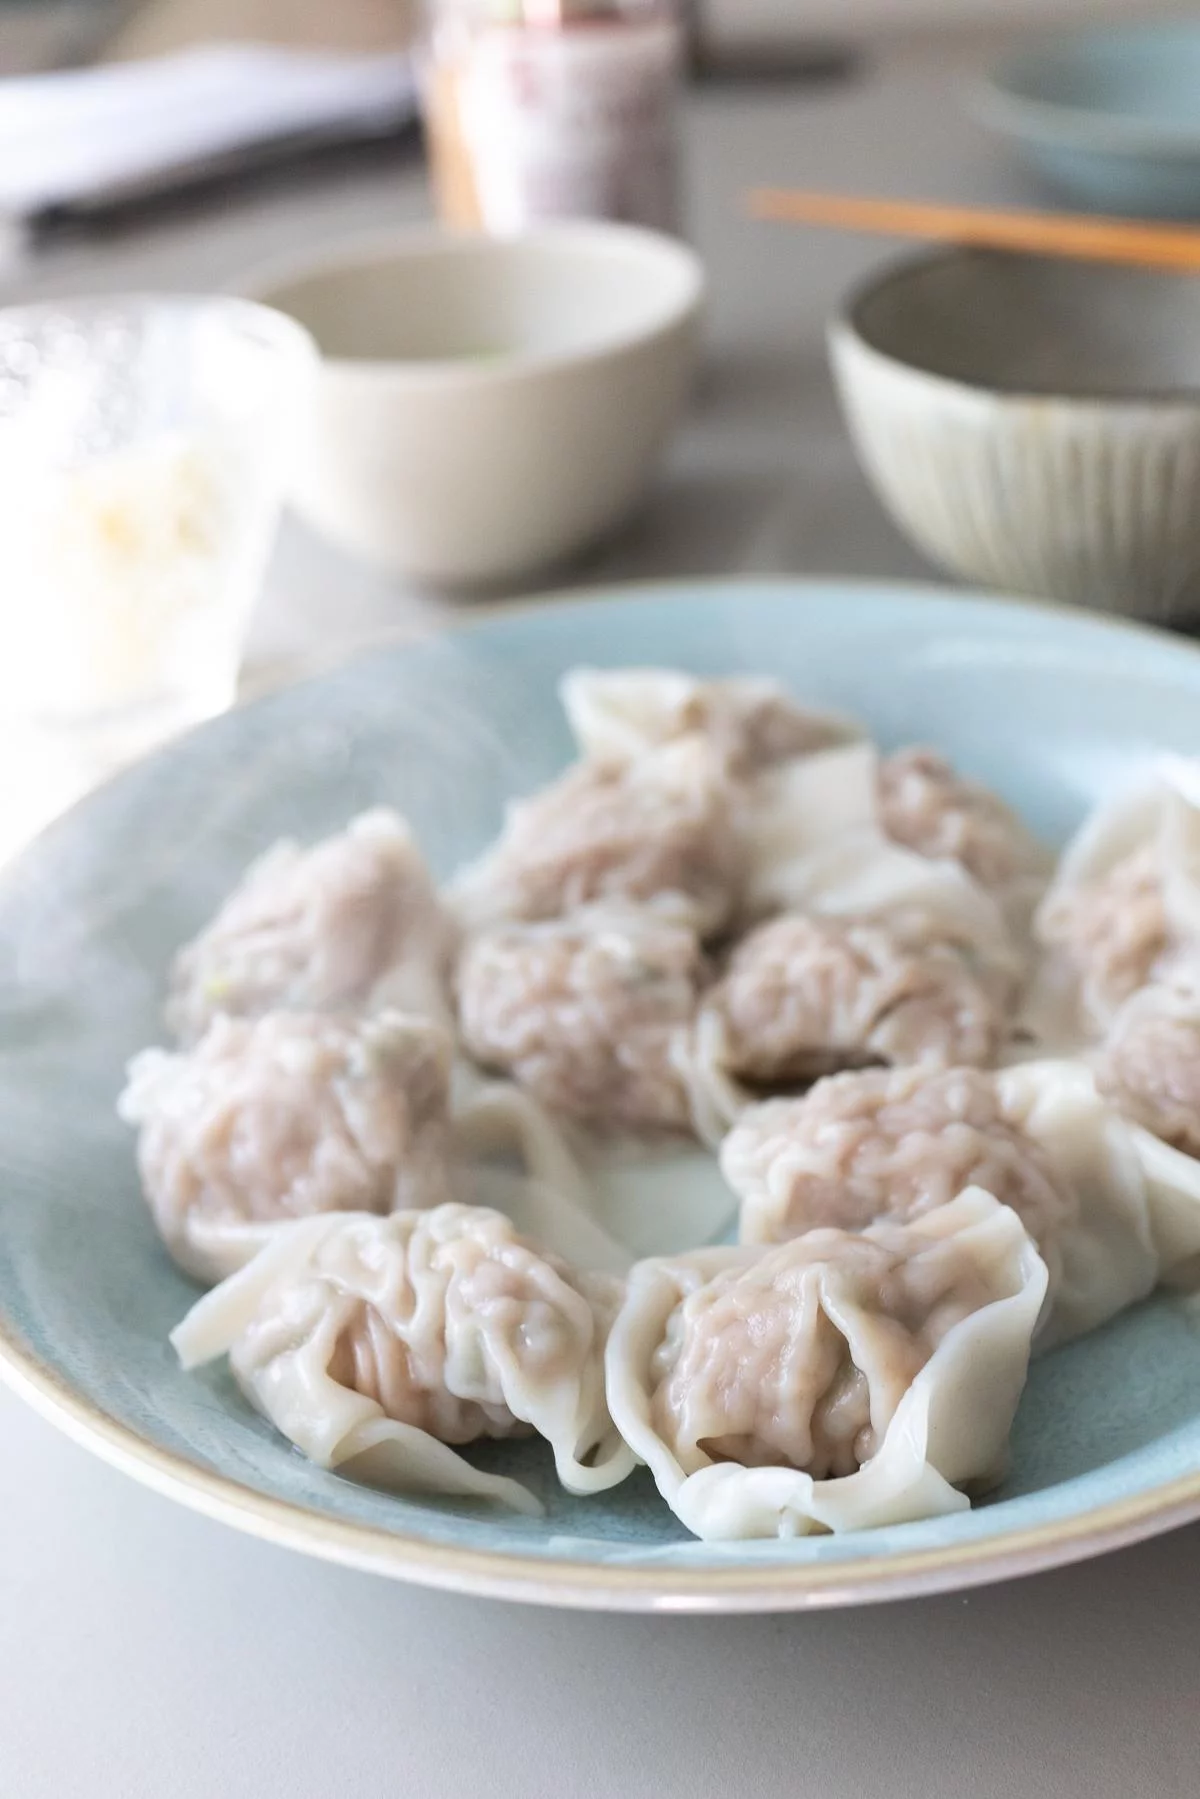 A plate of boiled wontons